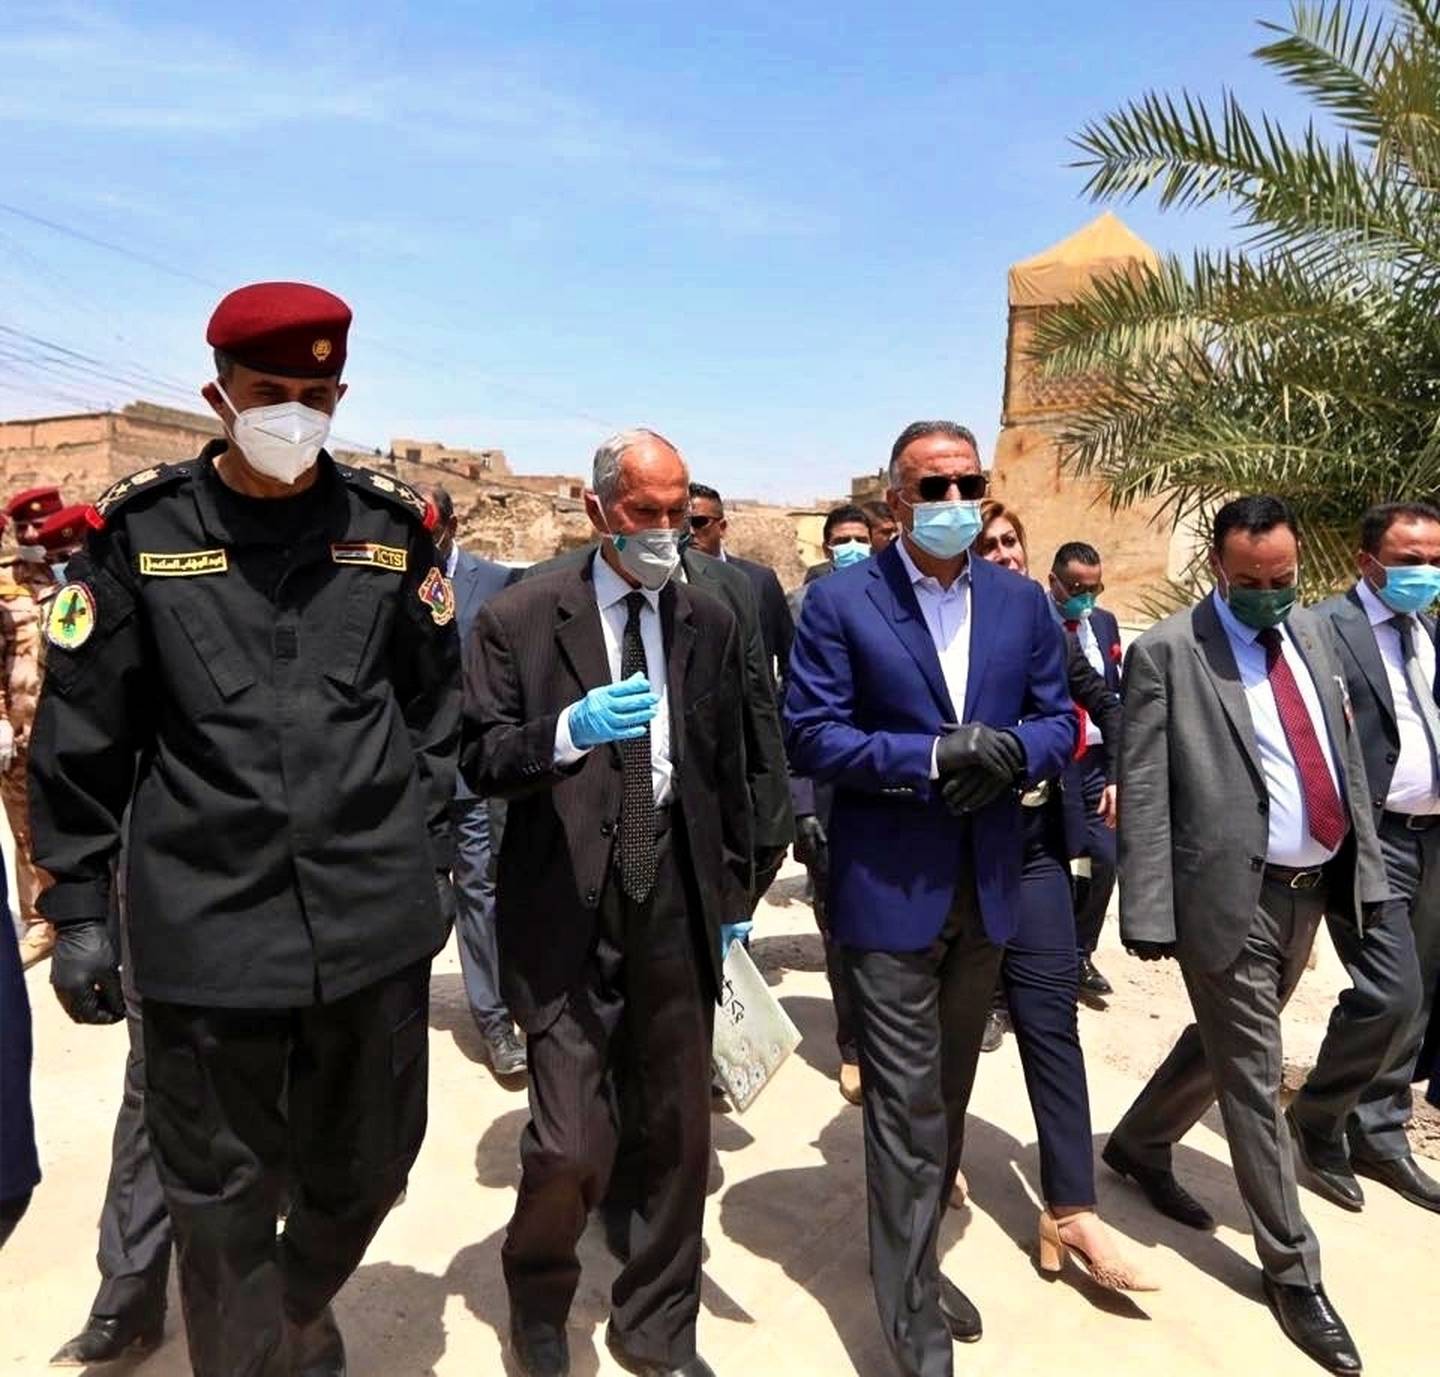 Iraqi Prime Minister Mustafa al-Kahdimi, center, visits the site of the Al–Nuri mosque, which was destroyed by Islamic State militants, during his visit to Mosul, Iraq, Wednesday, June 10, 2020.